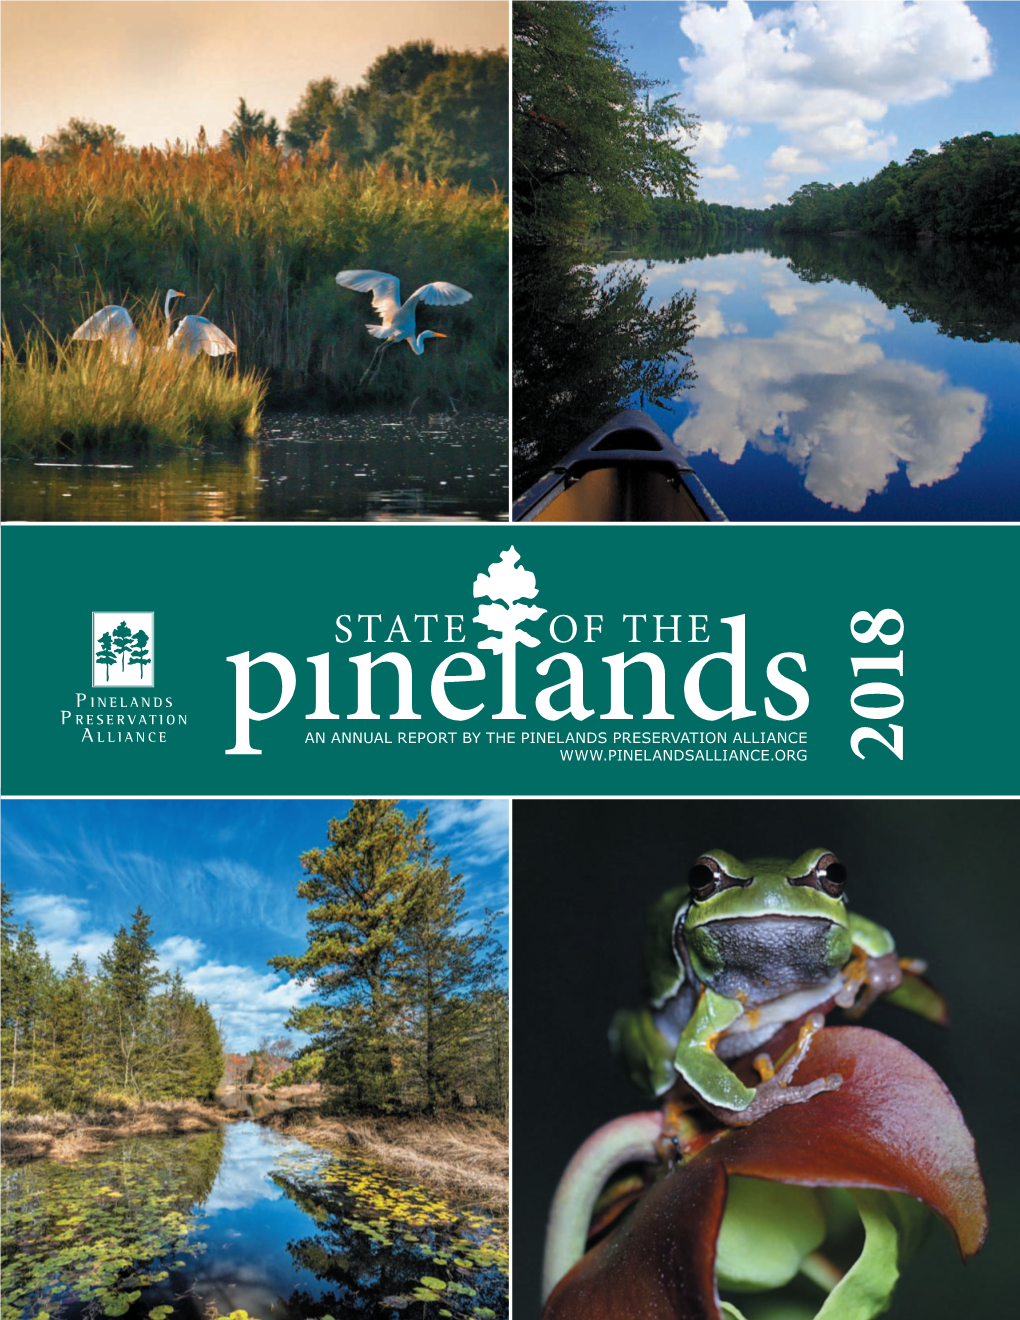 The New Jersey Pinelands